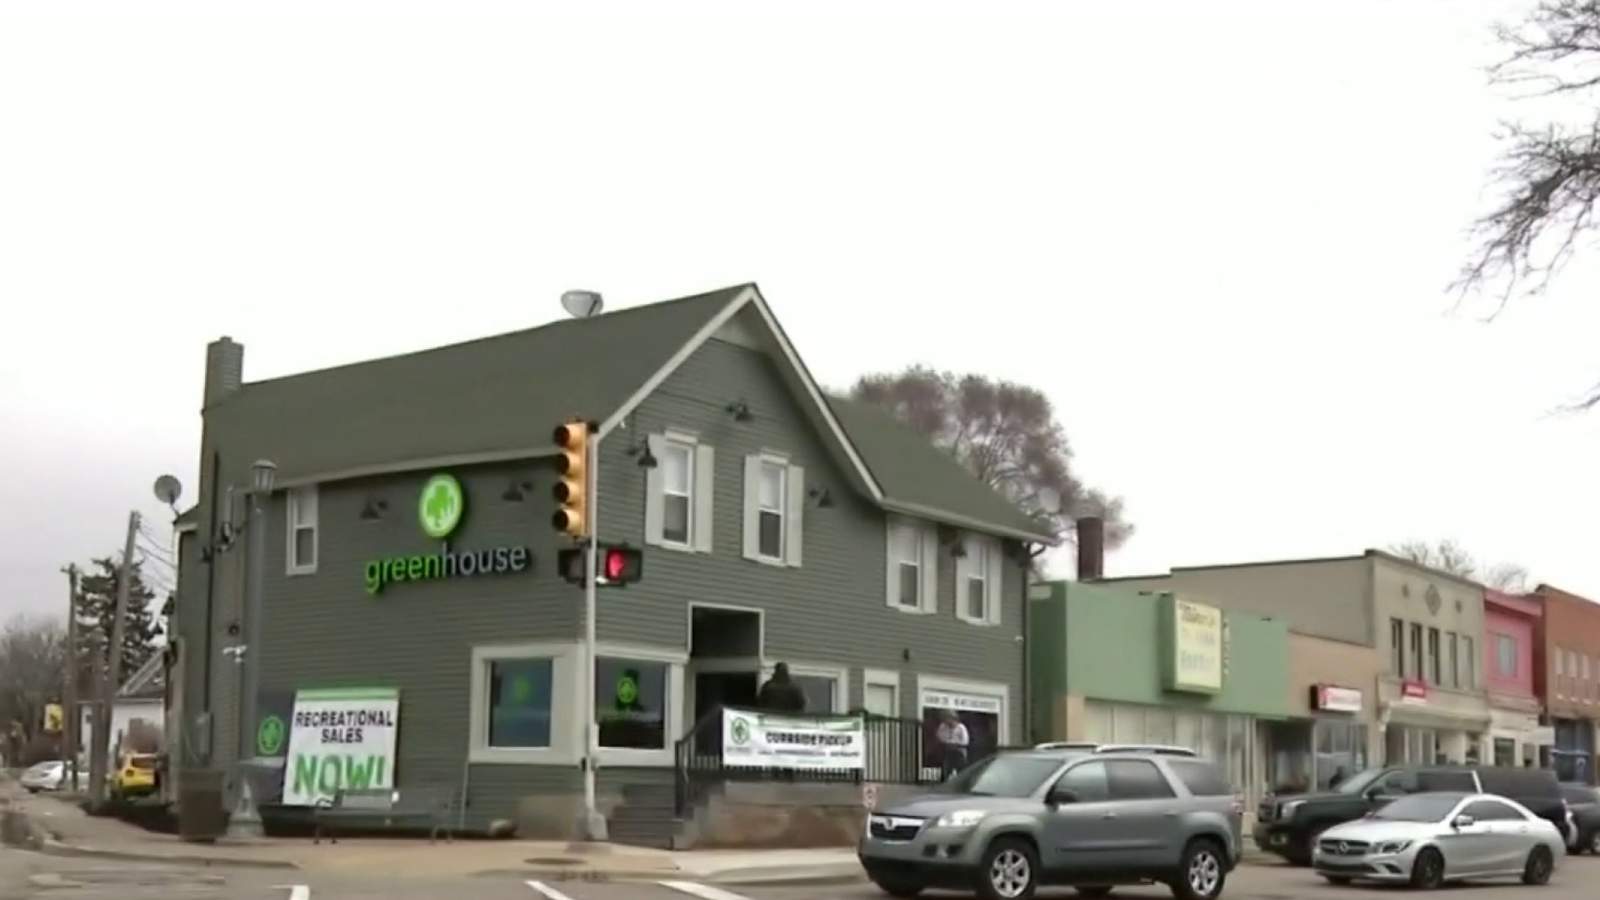 Business is booming for pot shops amid coronavirus outbreak